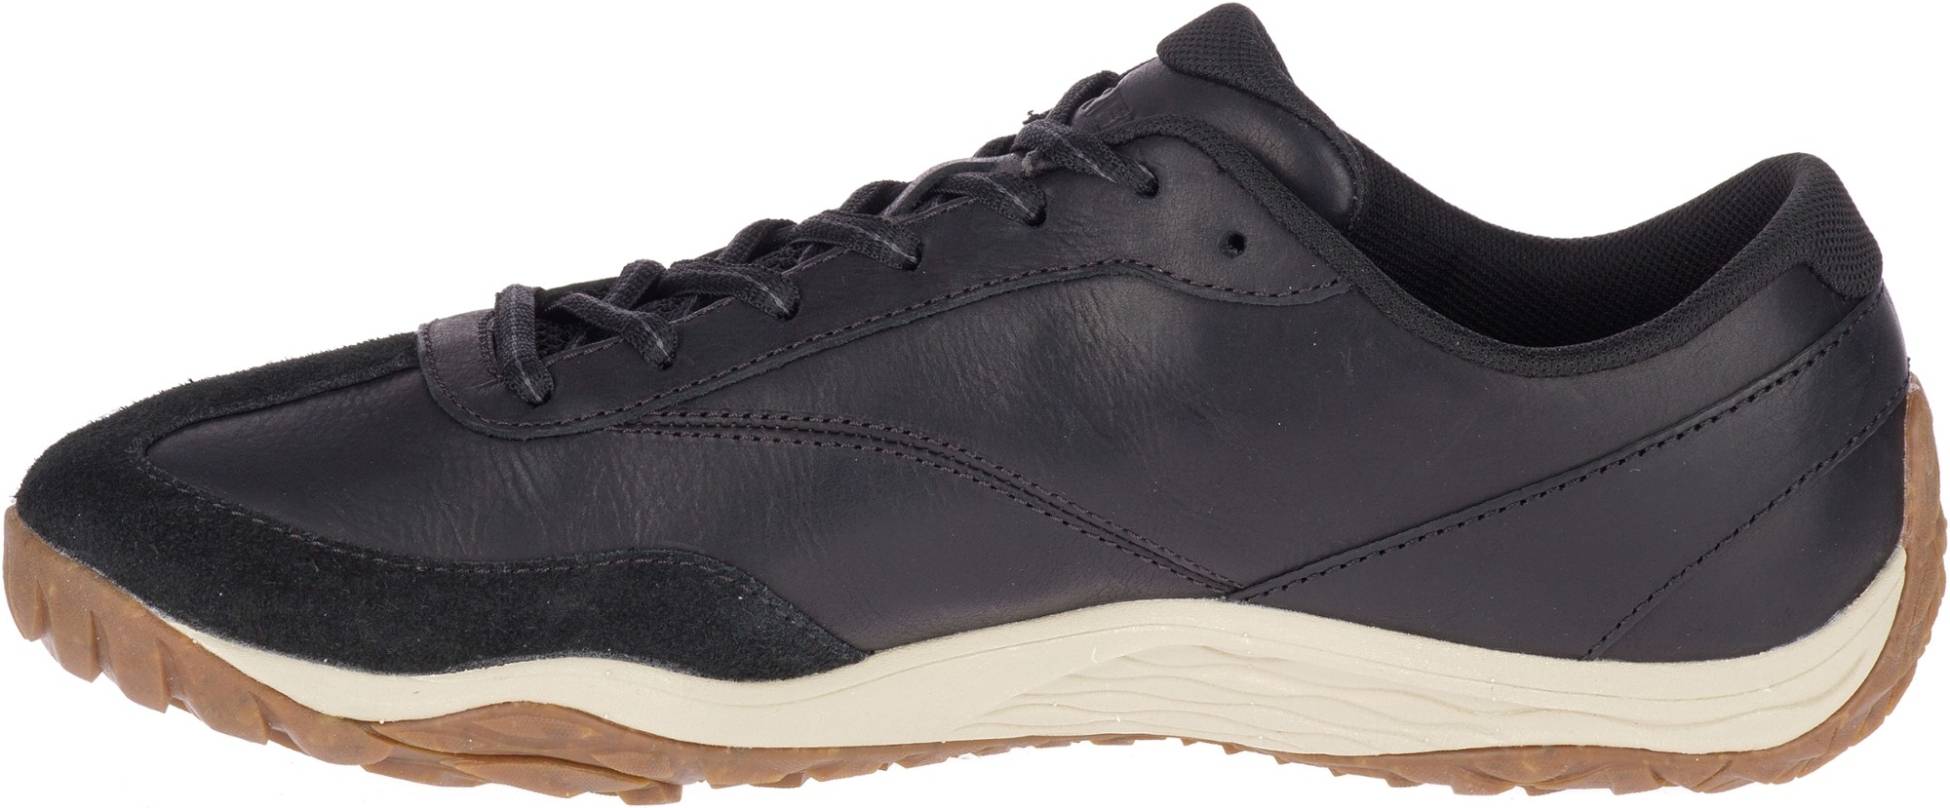 Leather running shoes: Save up to 40 